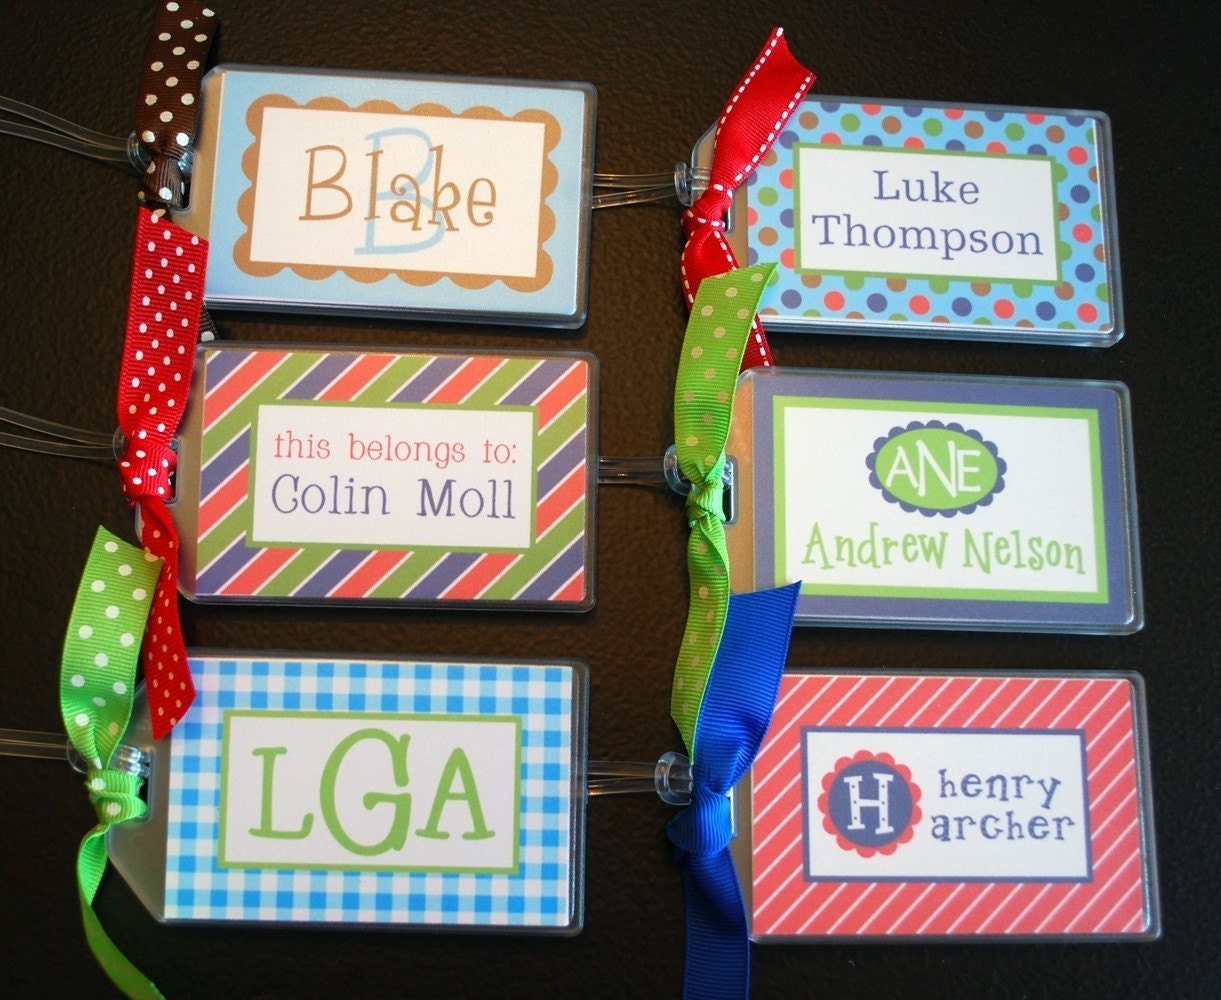 Boy Personalized Name / Monogram Bag Tag - Luggage, Backpack, Book Bag, Diaper Bag, etc - Design your own